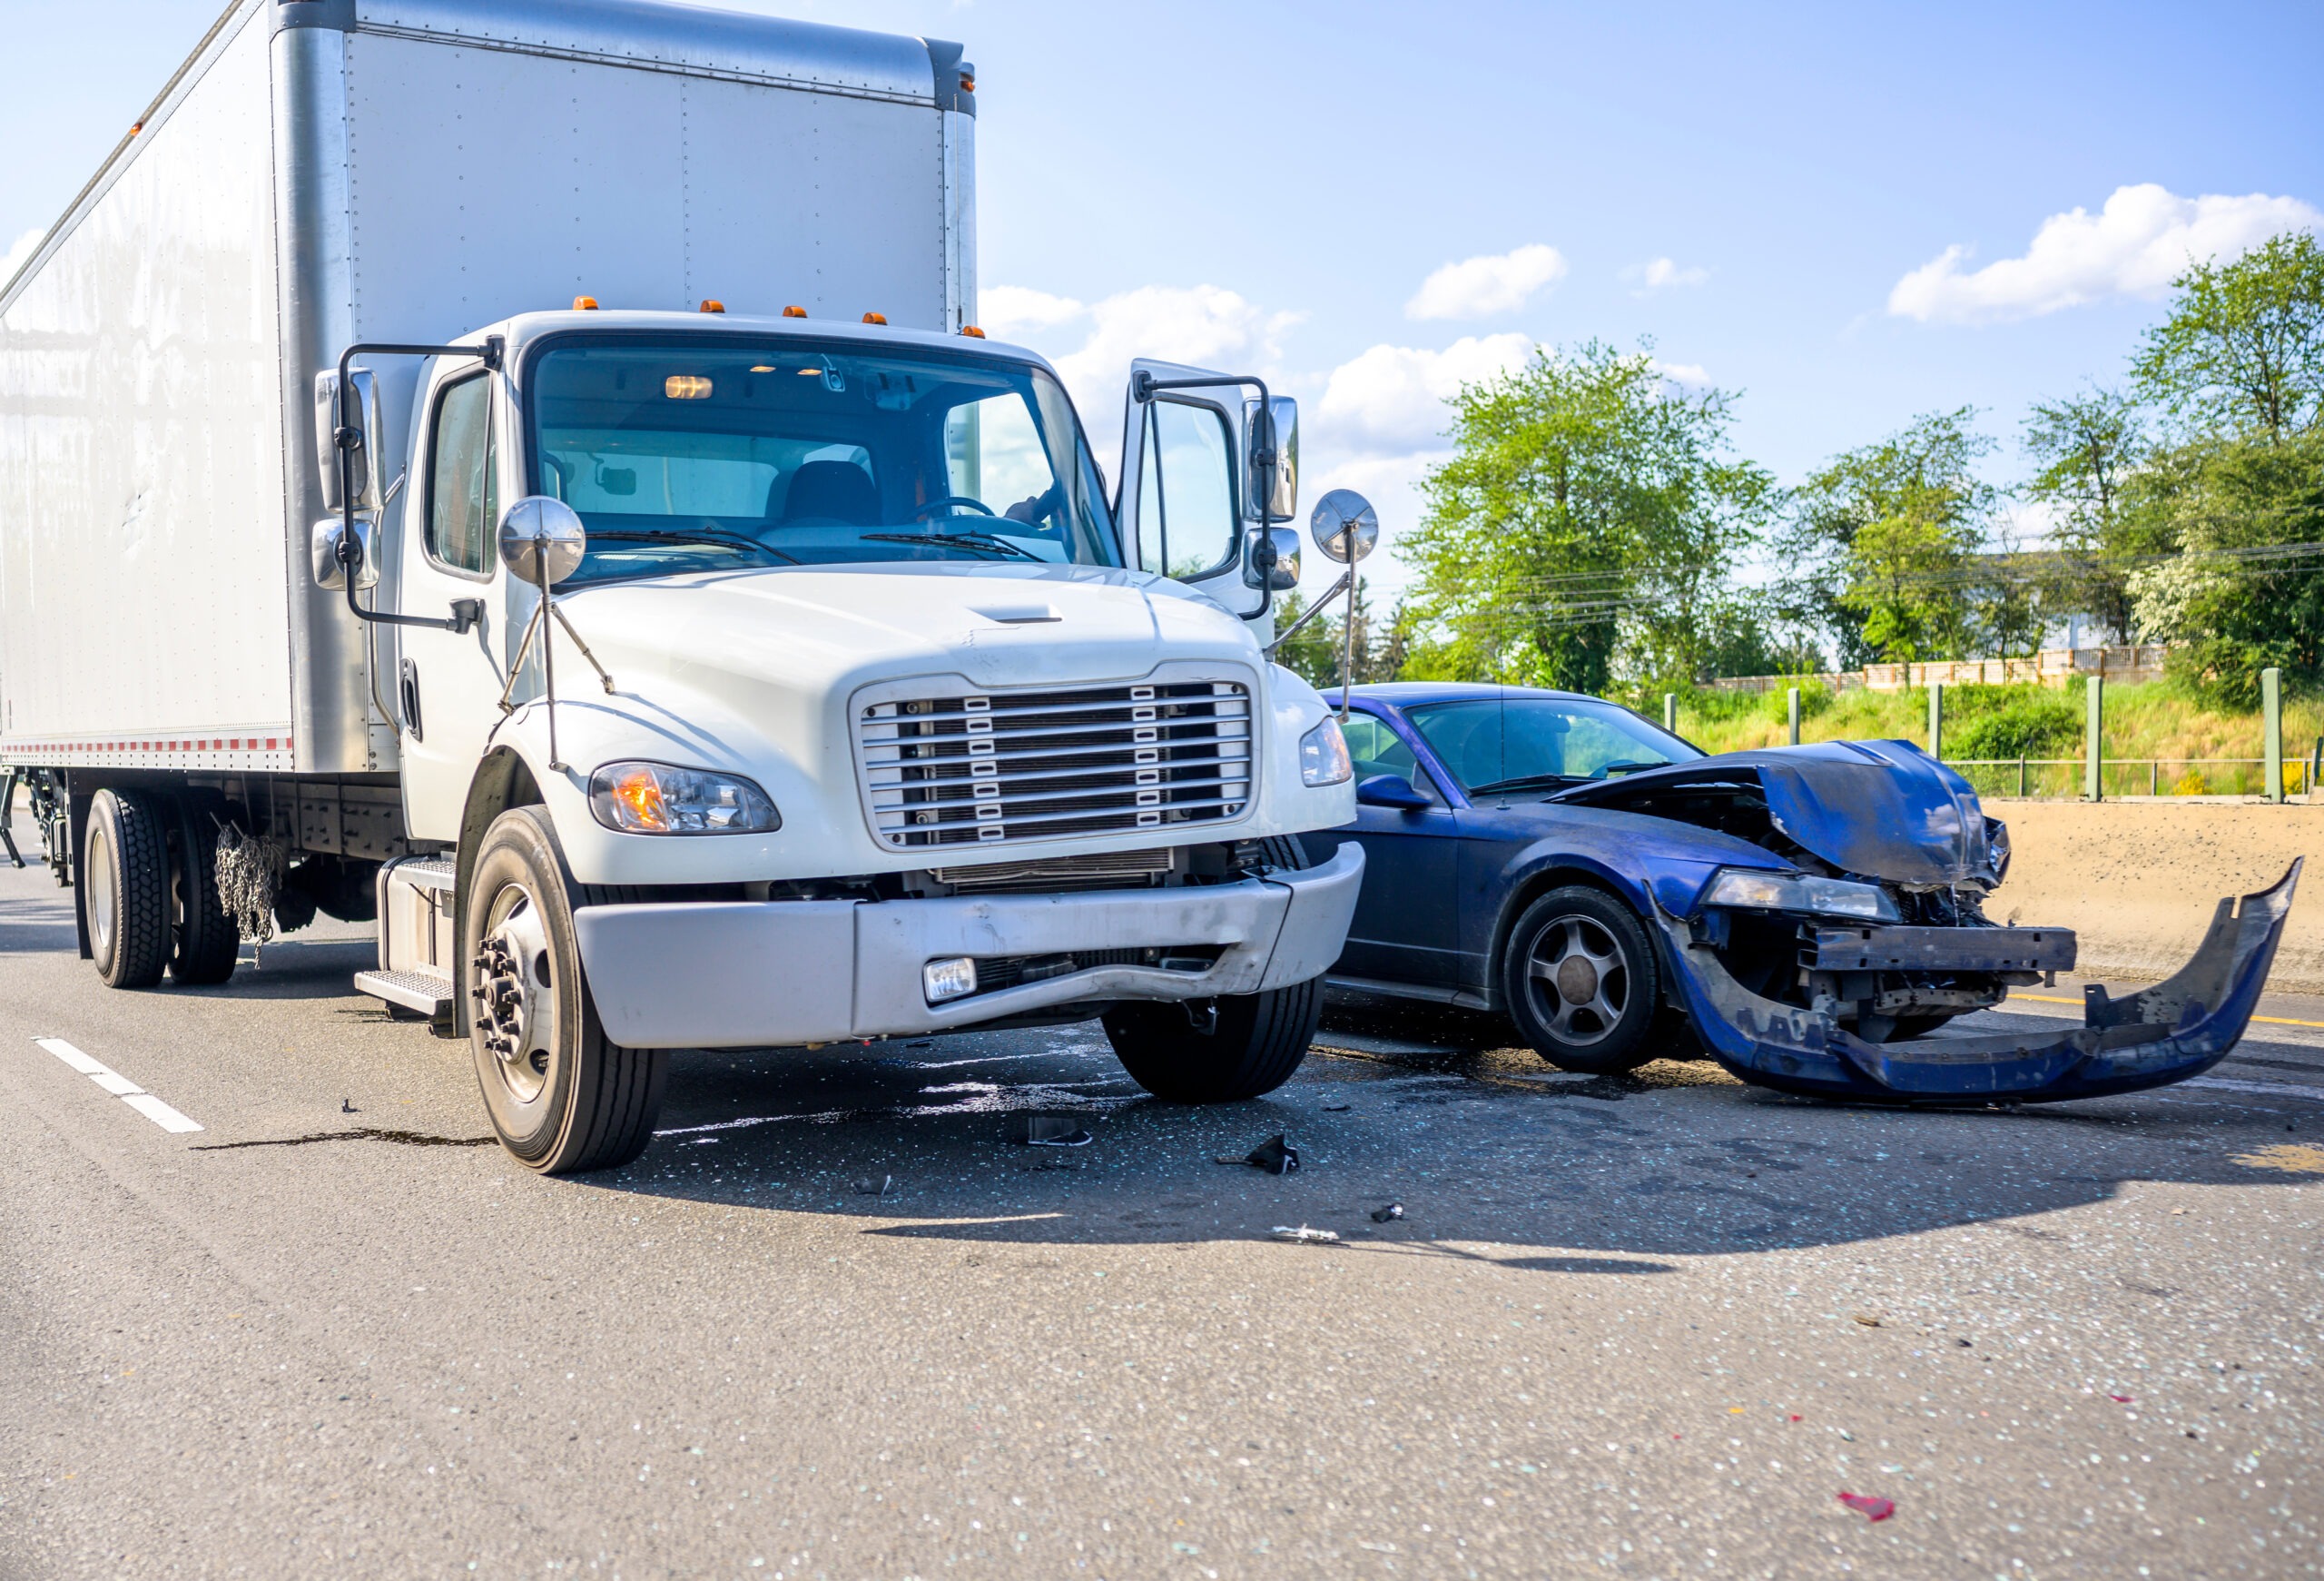 How Soon Should I Hire an Accident Attorney?